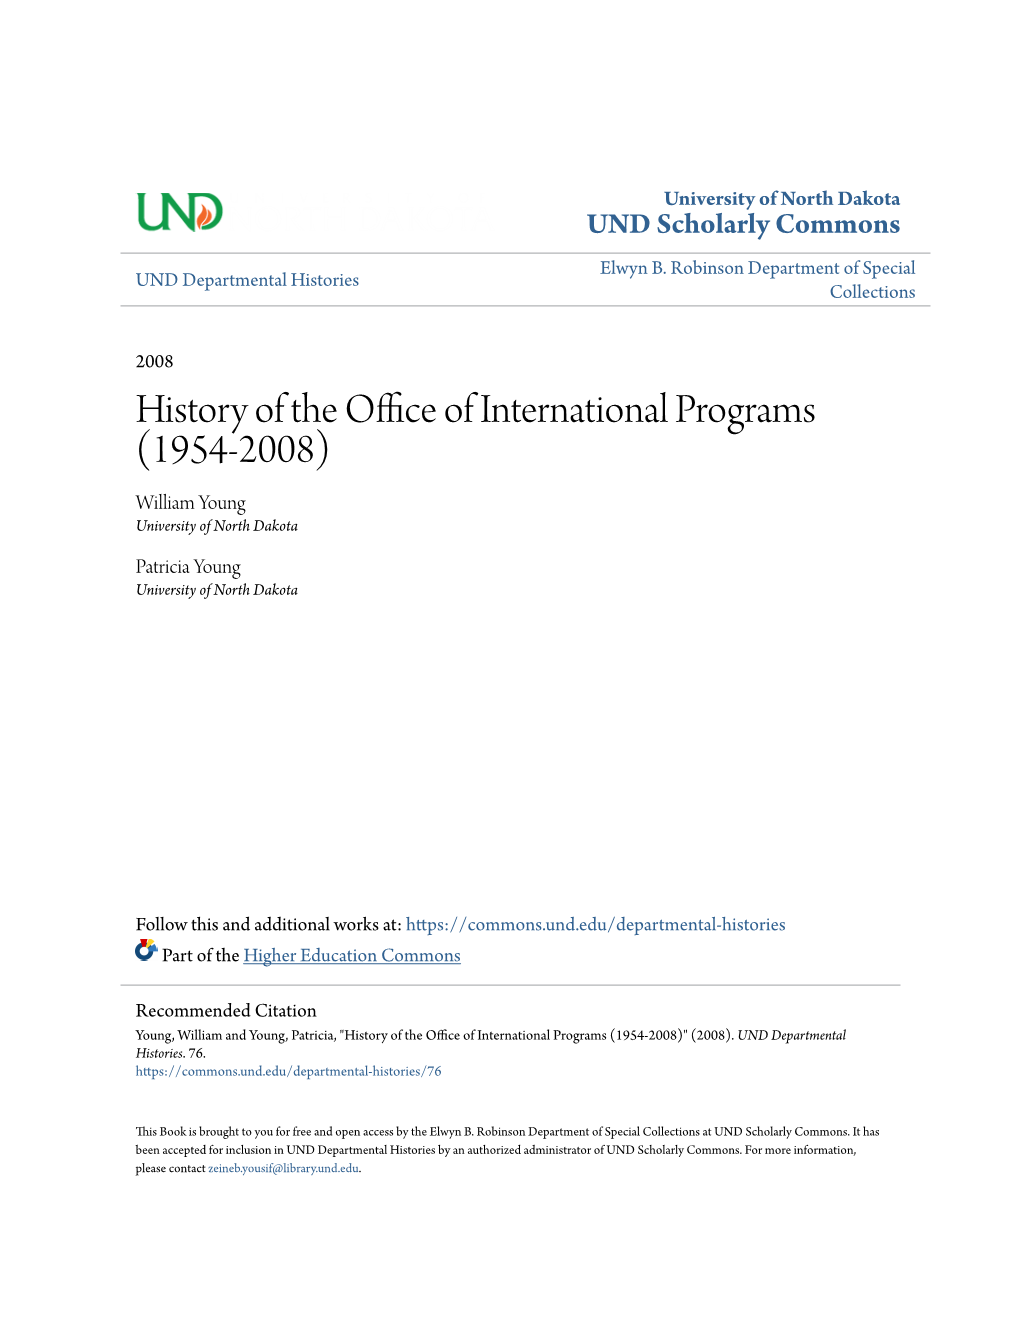 History of the Office of International Programs (1954-2008)" (2008)